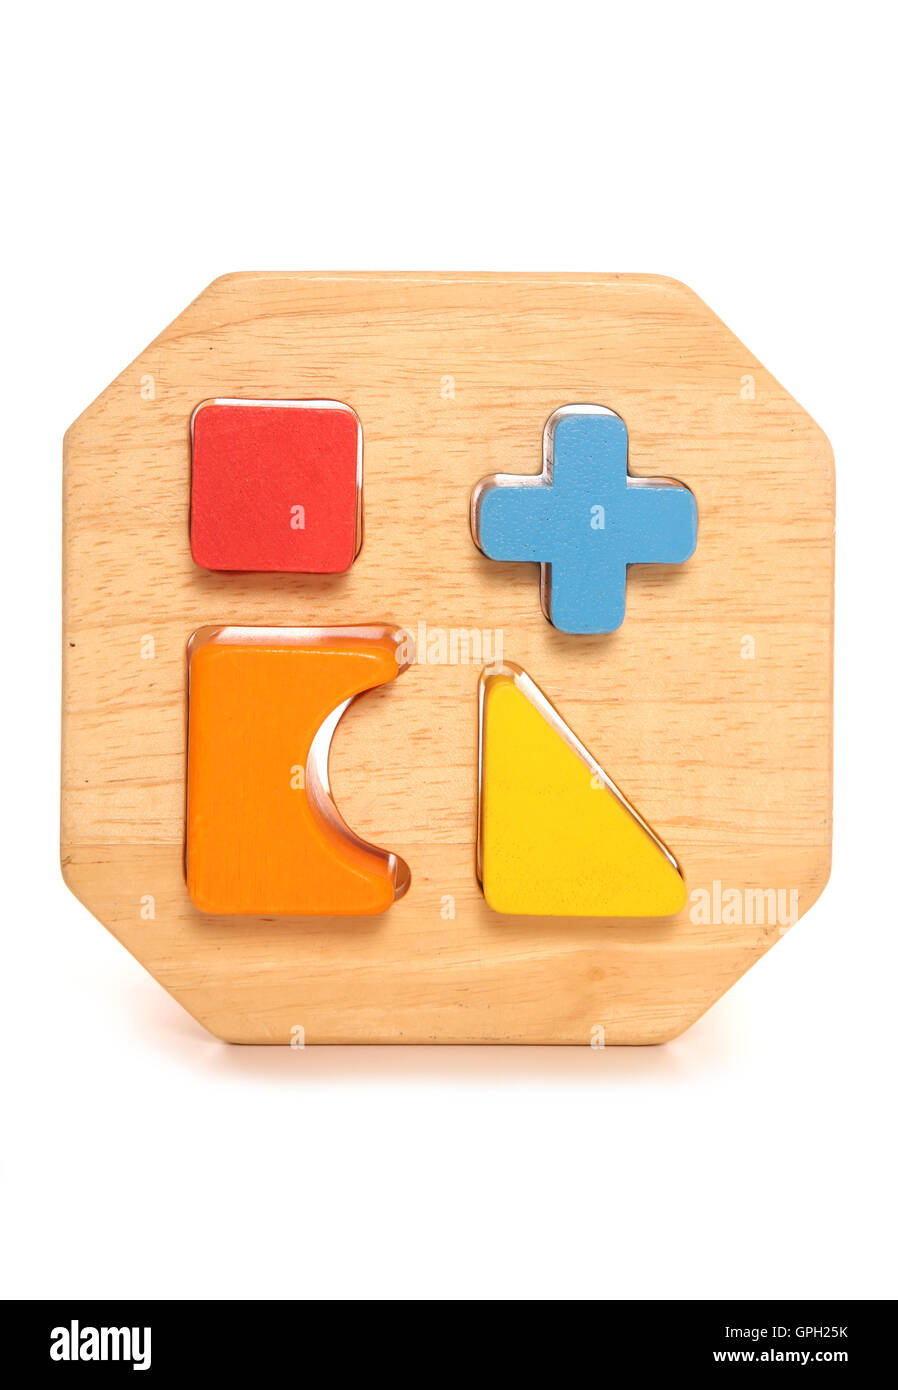 Wooden childs shape sorter toy cutout Stock Photo